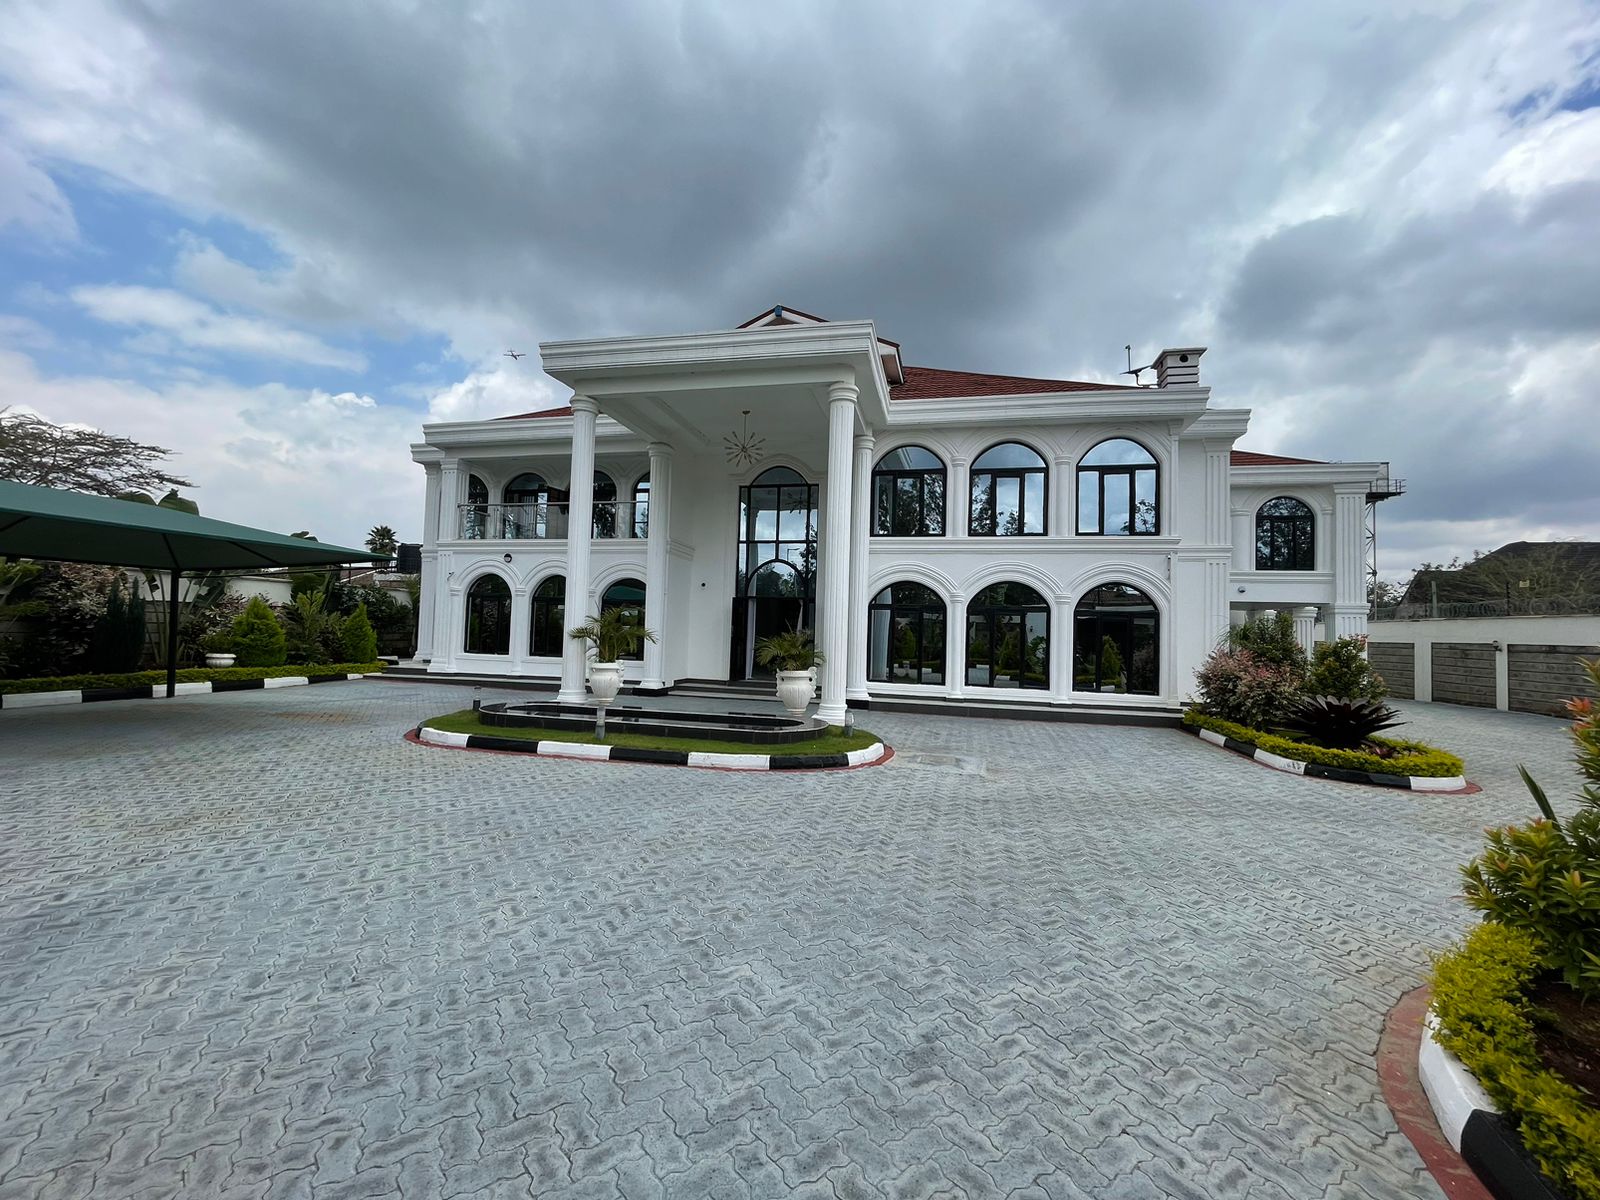 7 BEDROOMS ALL ENSUITE HOUSE ON SALE IN KAREN. In a gated community. Sitted on ½ acre. Has generator, well-manicured lawn. 170M Musilli Homes